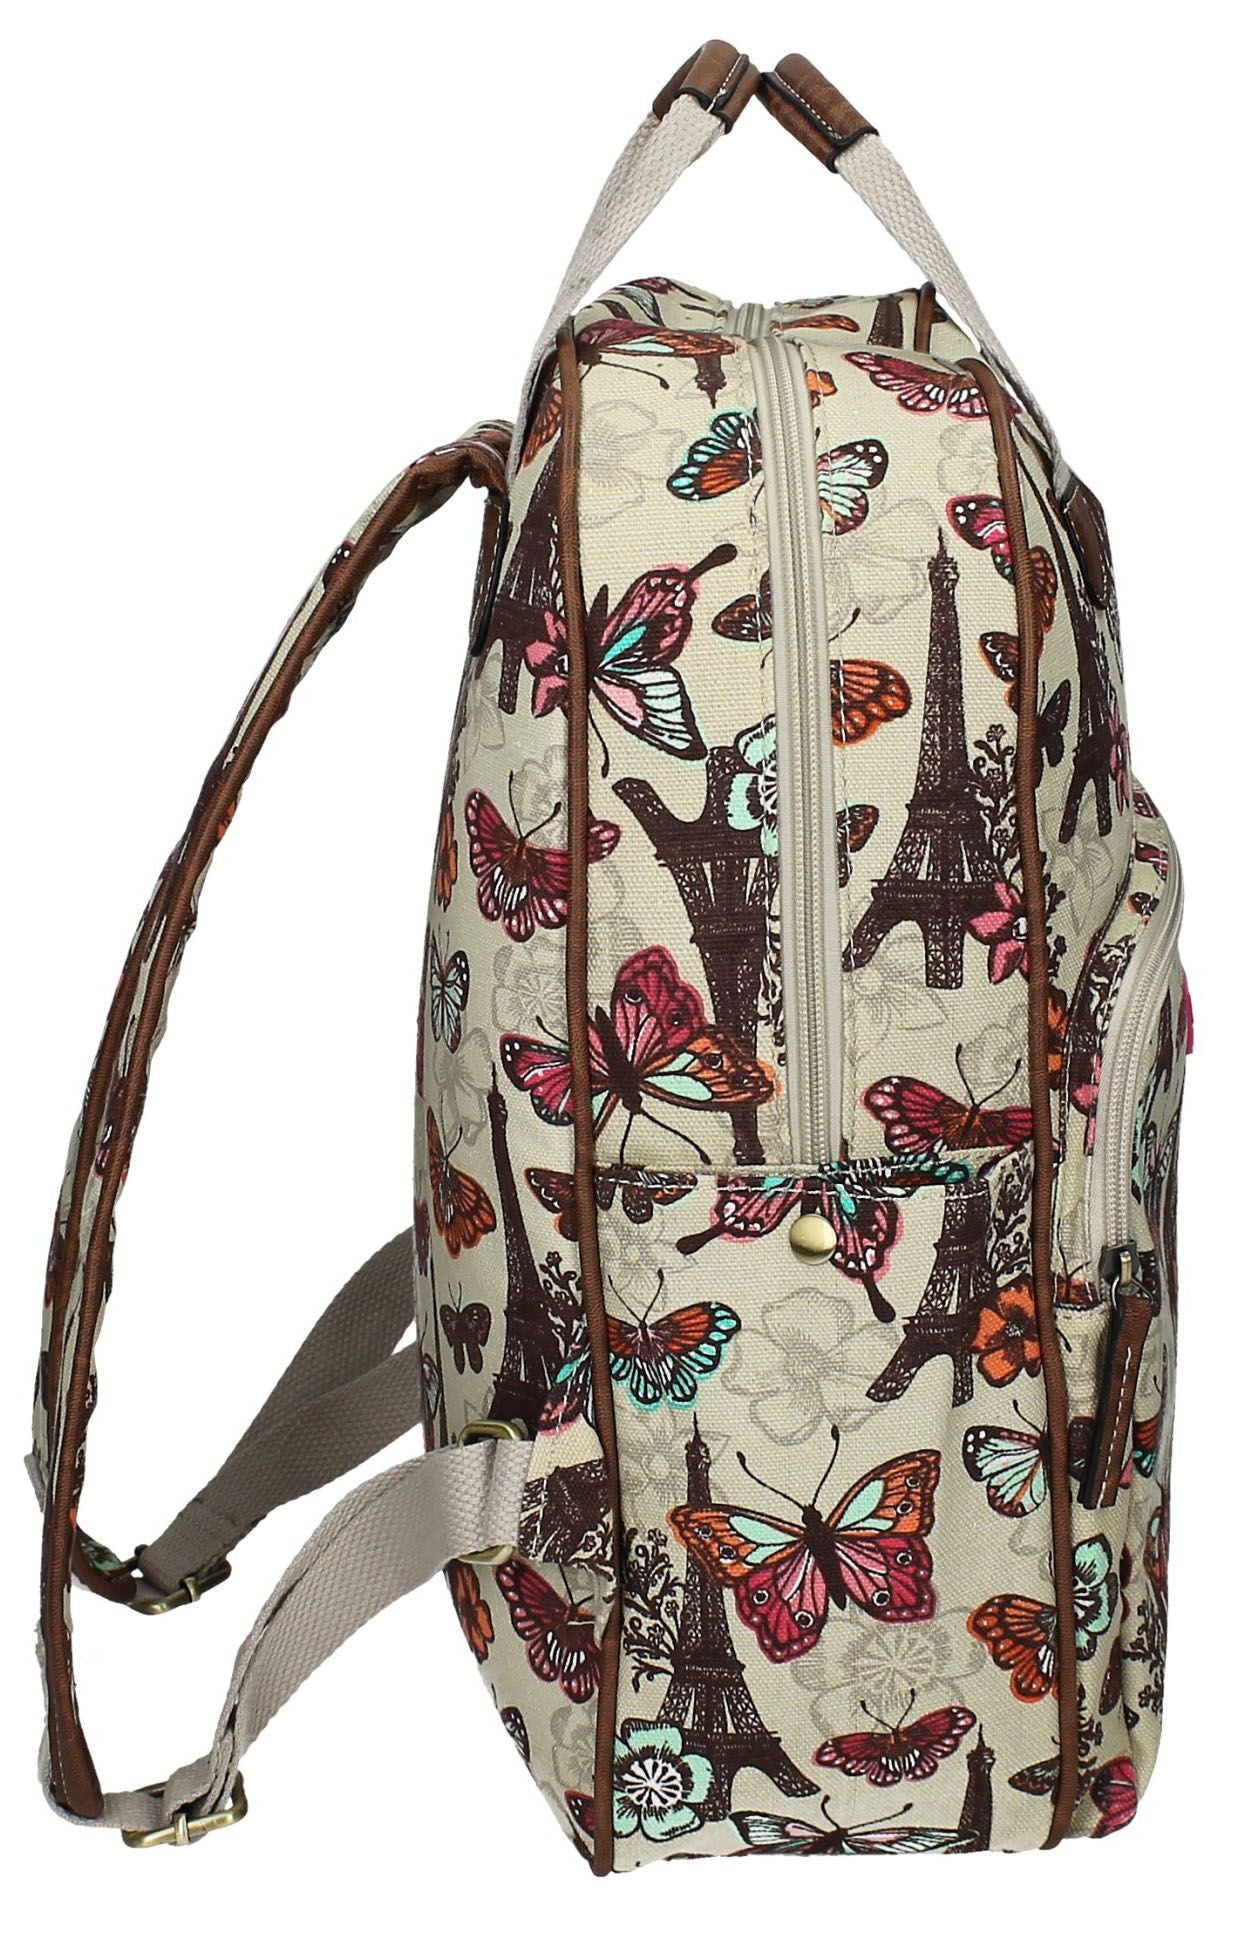 Swanky Swans Noel Paris Butterfly Floral Backpack with Tablet Case - WhiteBeautiful cheap school backpack bag